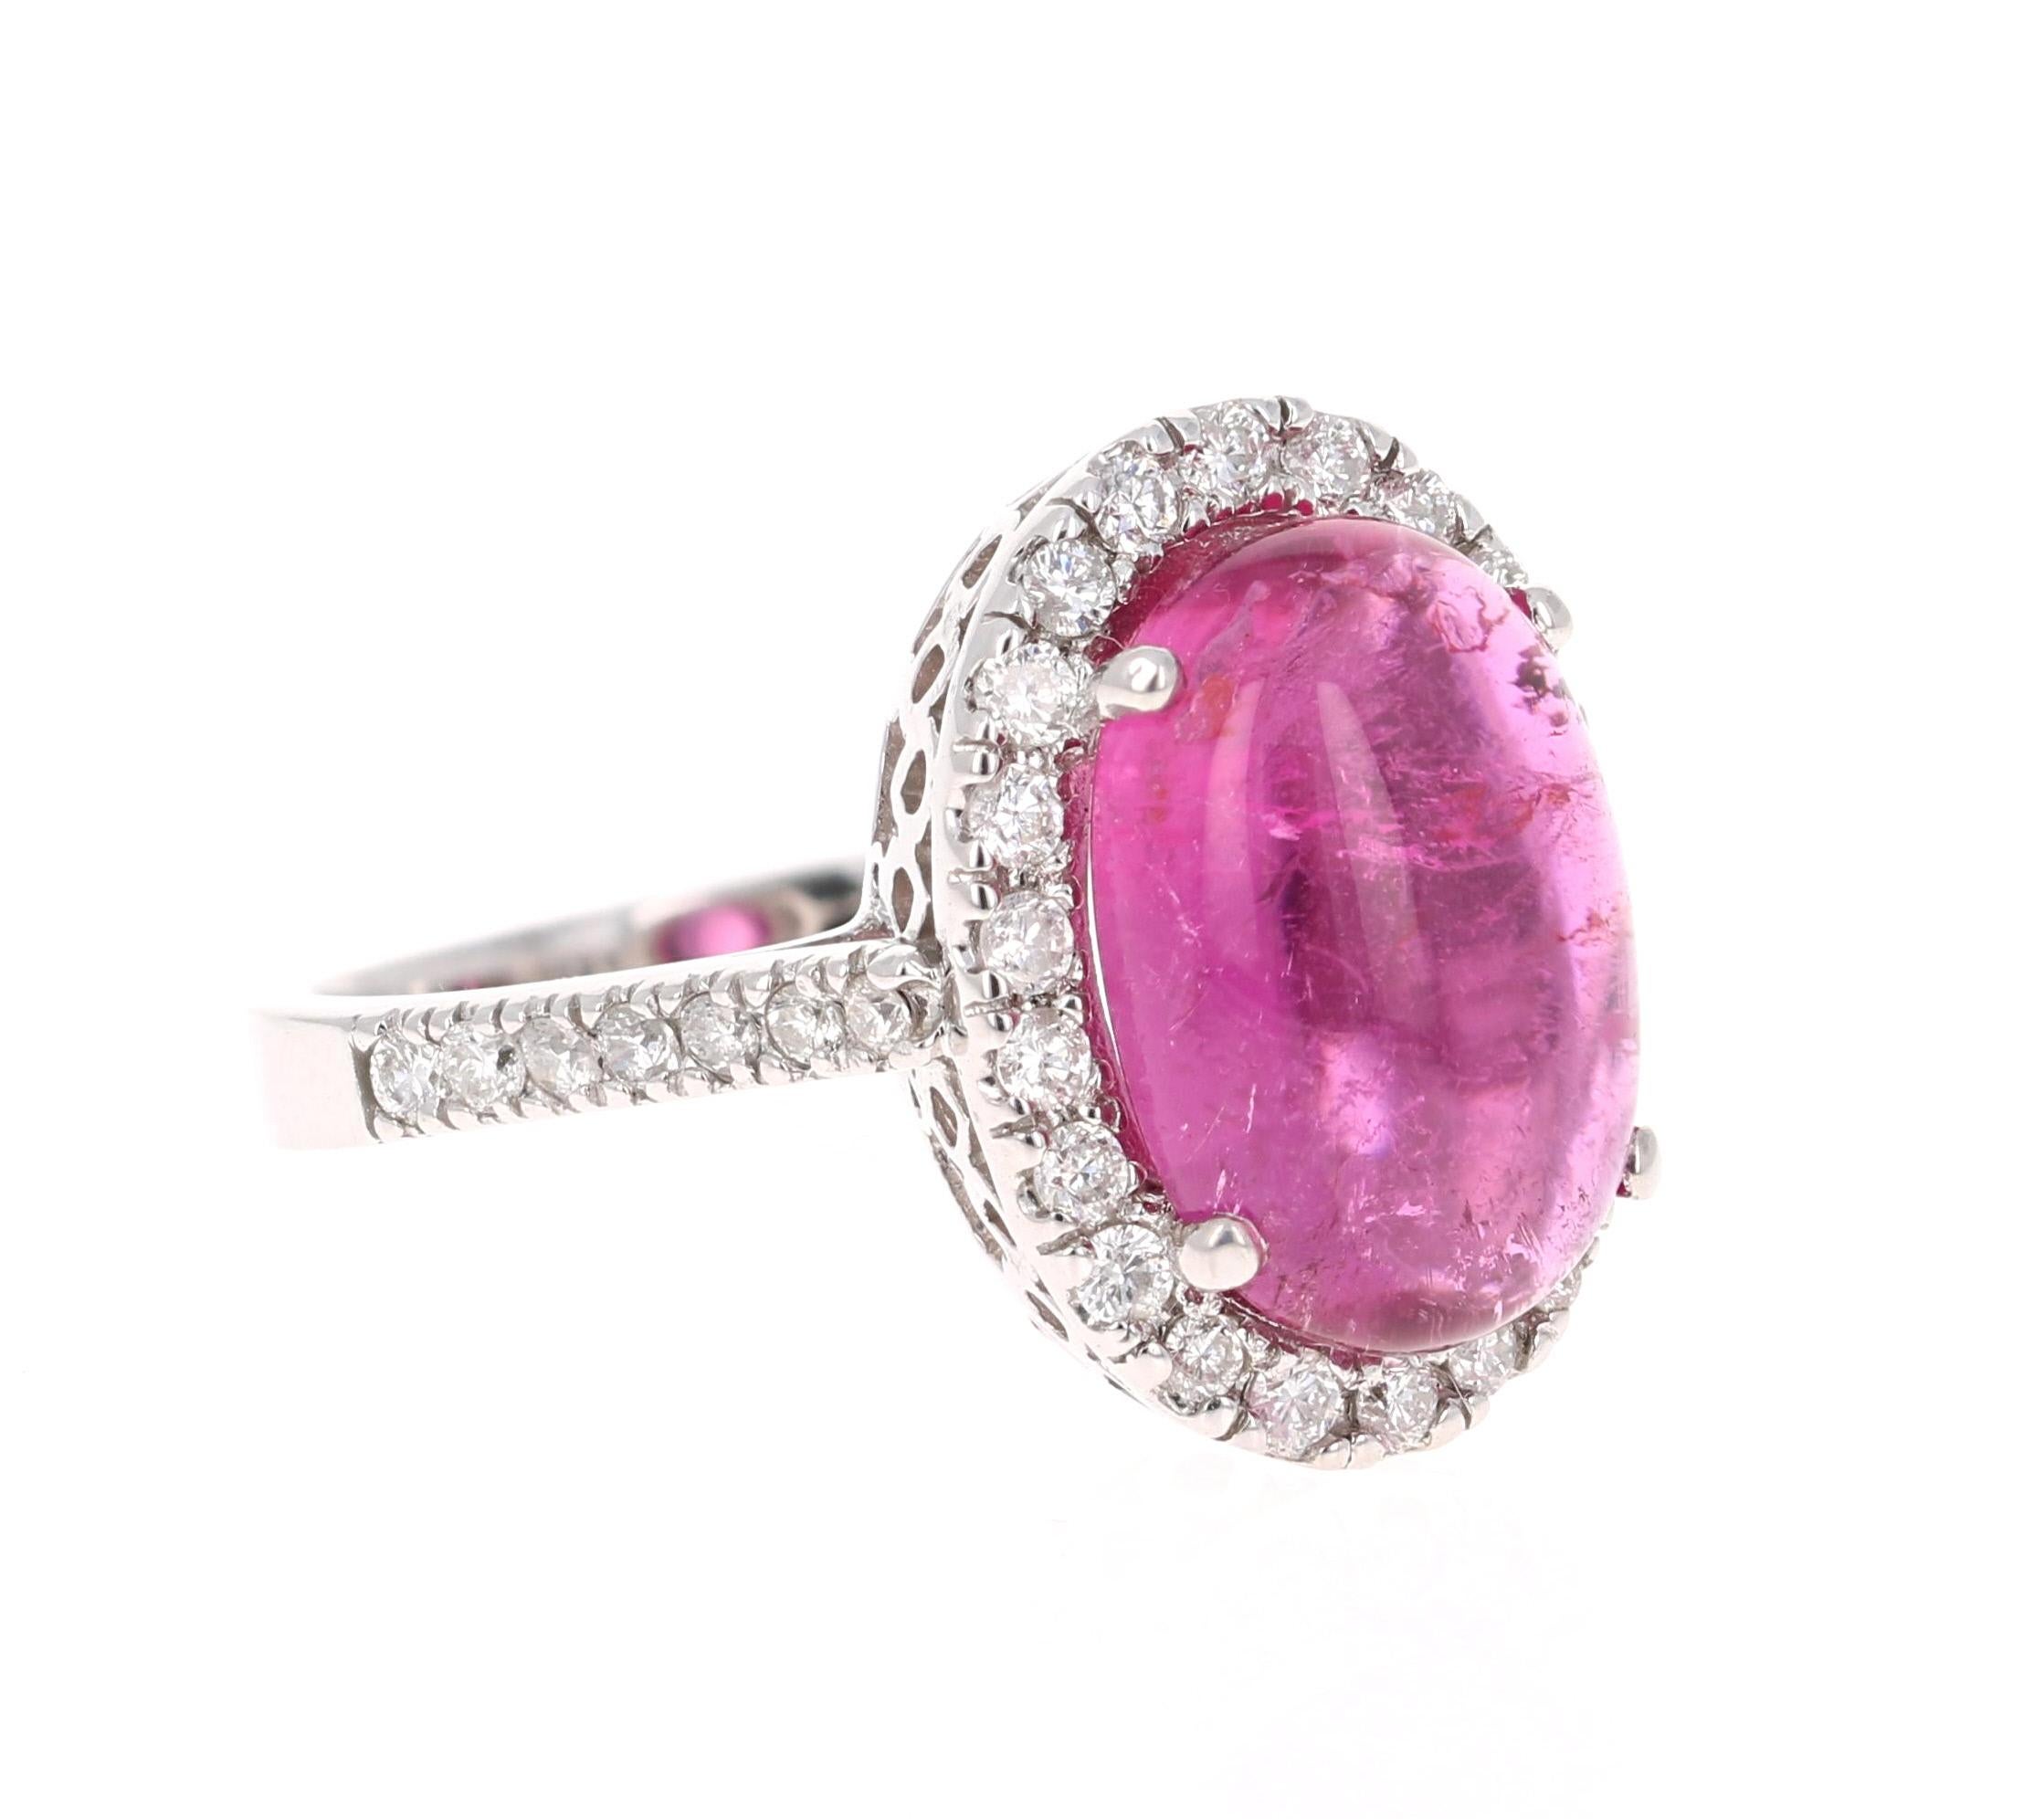 This ring has a simply gorgeous Oval Cut/Cabochon Pink Tourmaline that weighs 6.10 Carats. Floating around the tourmaline is a simple halo of 36 Round Cut Diamonds that weigh 0.62 Carats. The total carat weight of the ring is 6.72 Carats. 

This